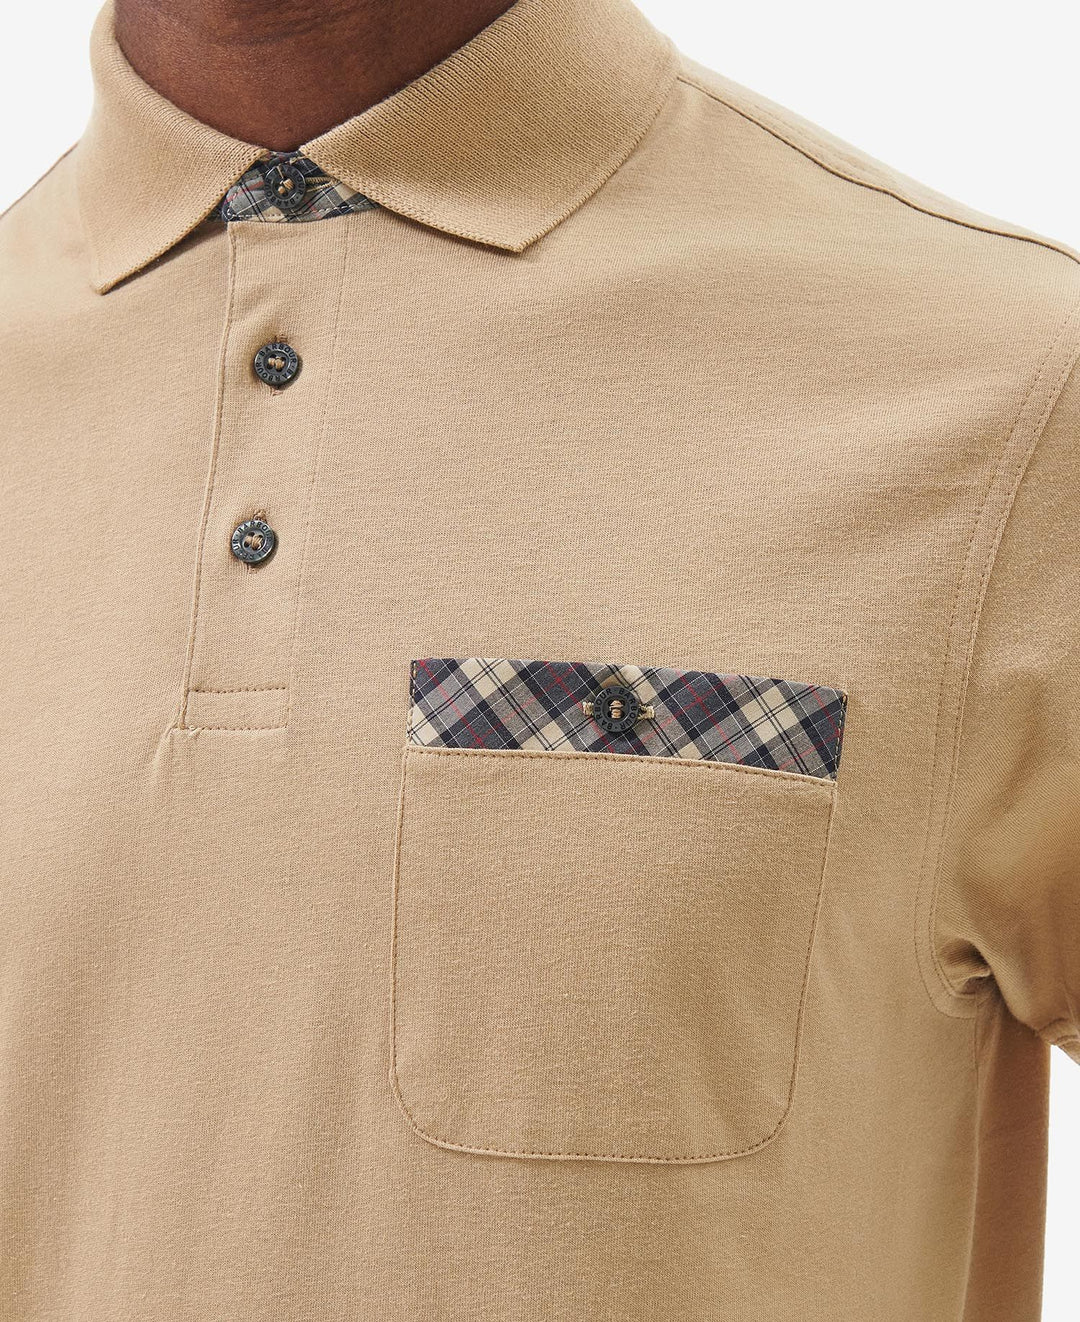 Barbour Hirstly Polo/Polo Majica MML1309